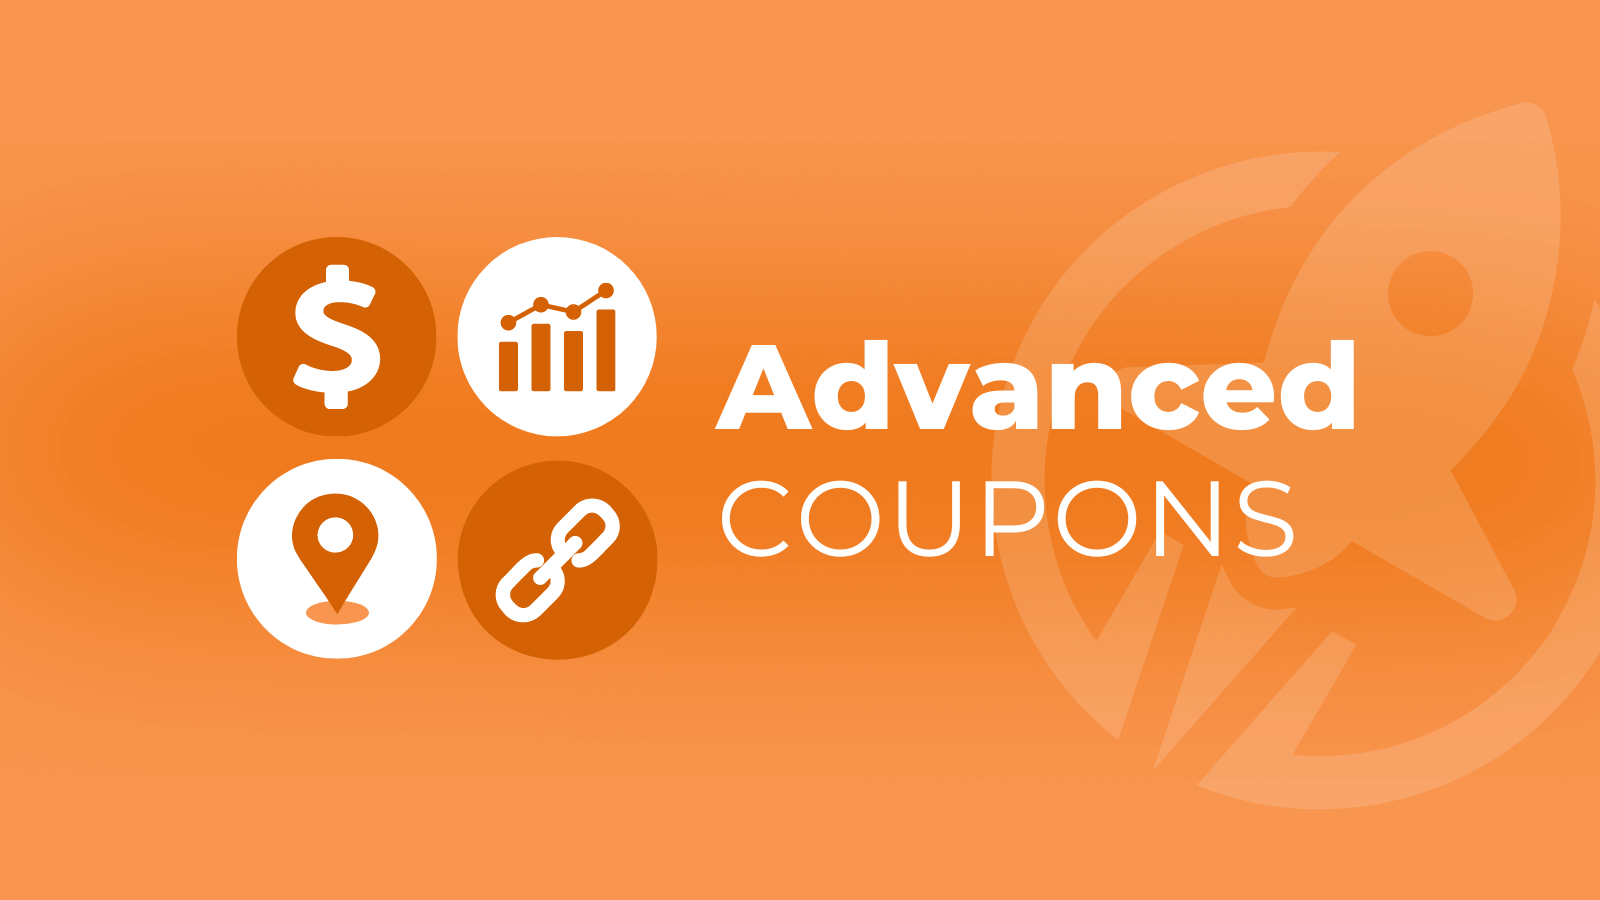 LifterLMS Advanced Coupons